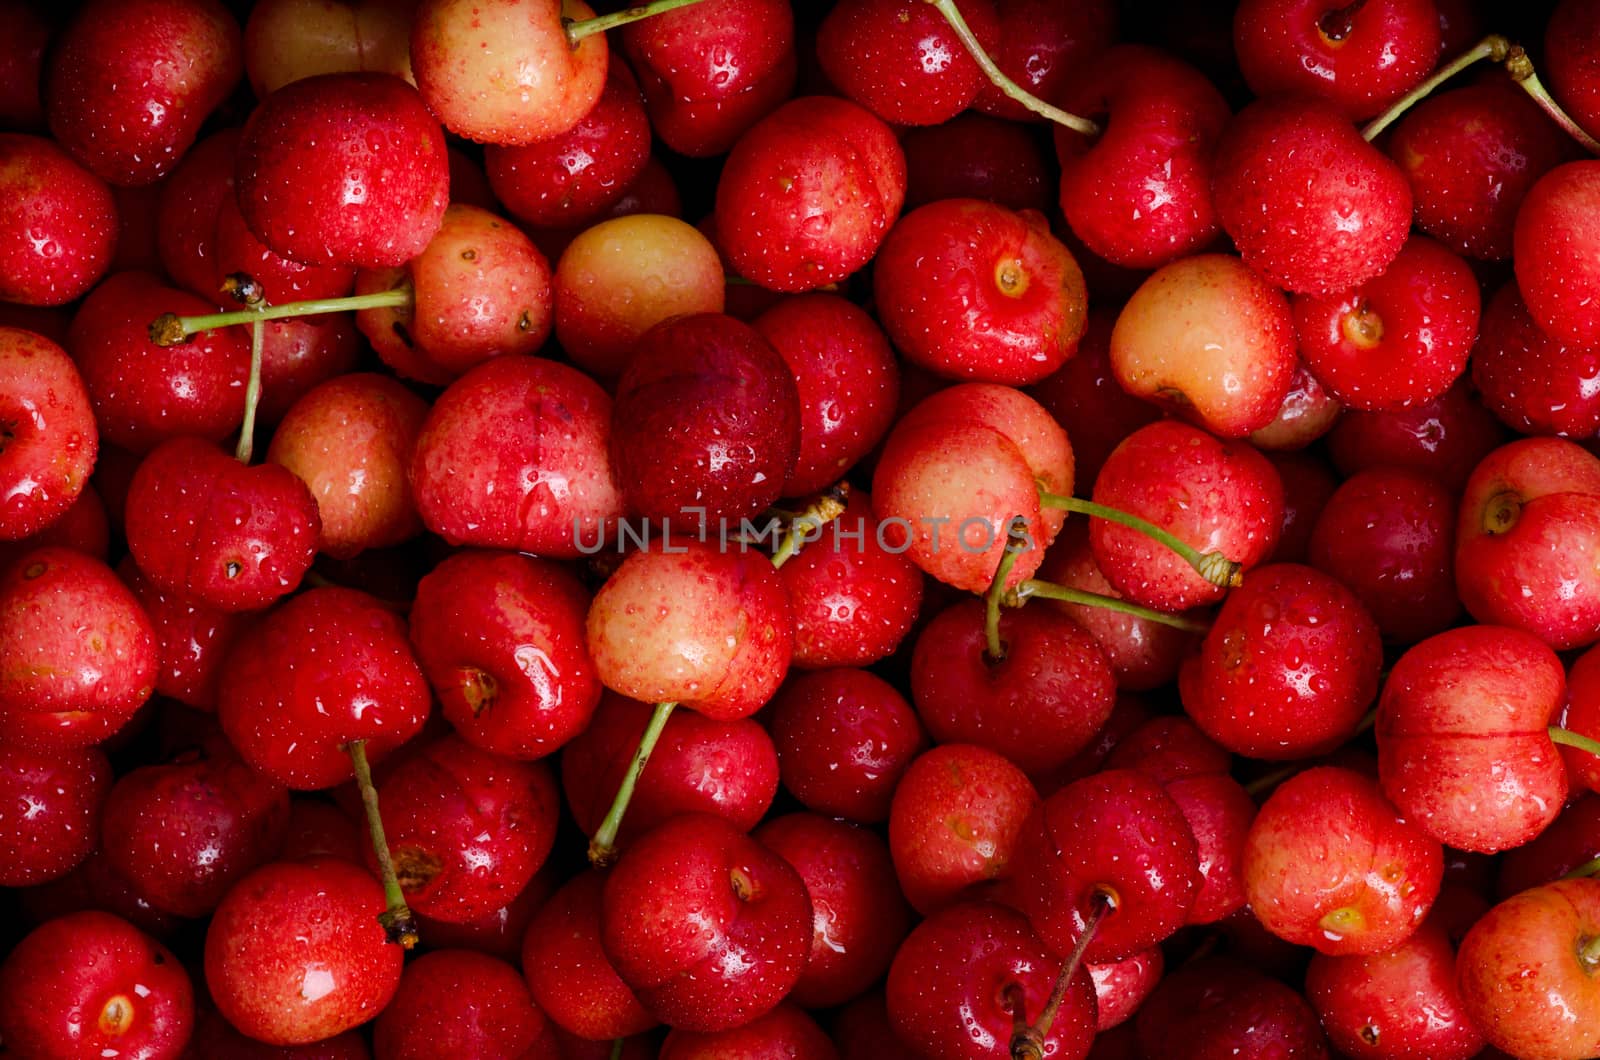 Fresh dewy cherries as lovely natural pattern.